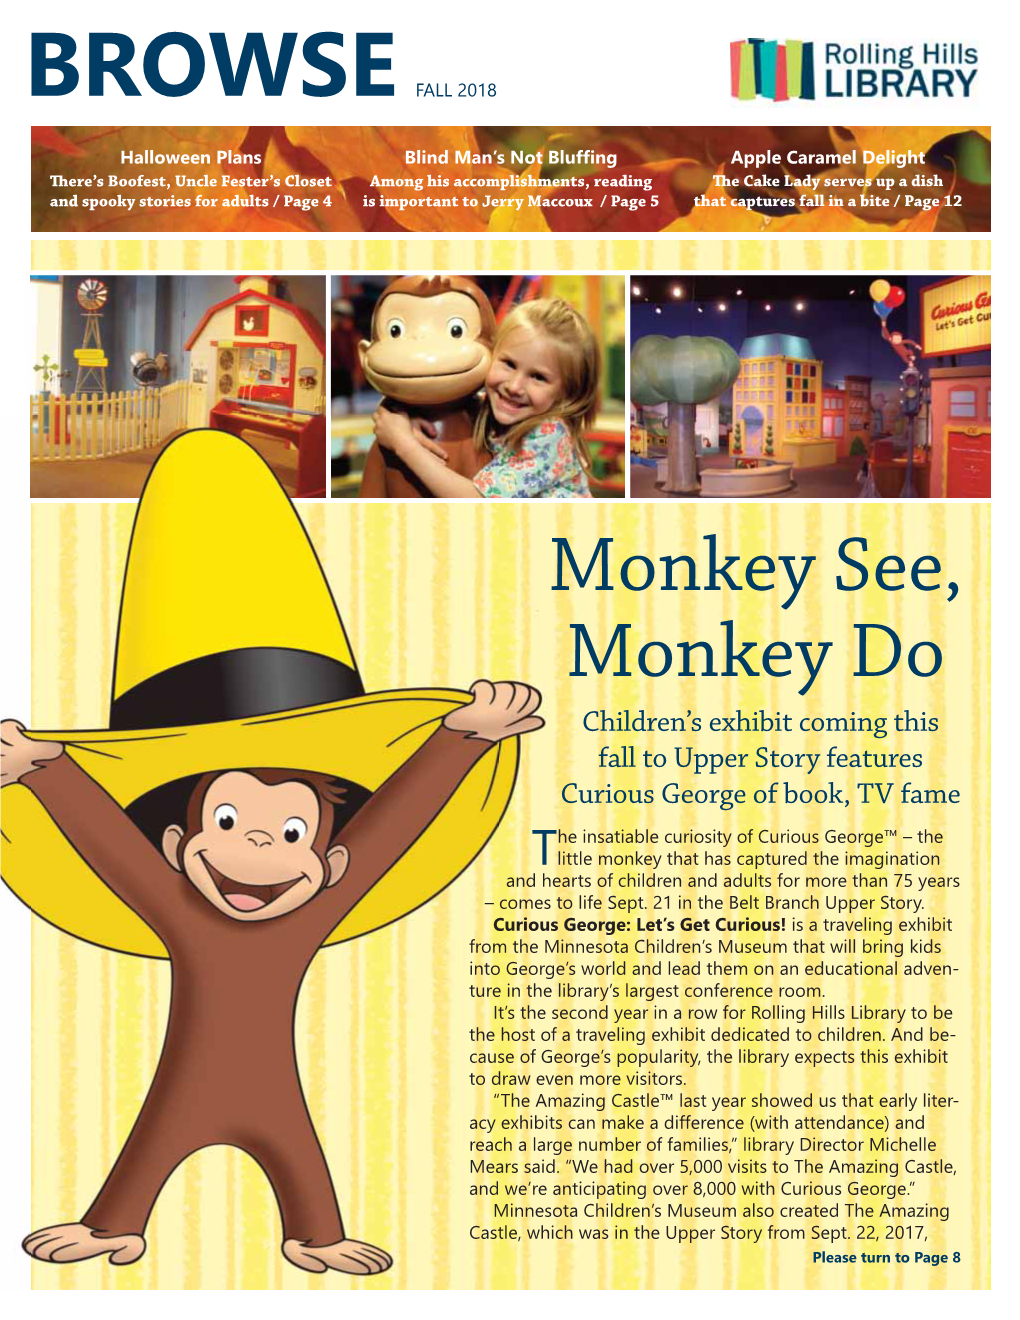 Monkey See, Monkey Do Children’S Exhibit Coming This Fall to Upper Story Features Curious George of Book, TV Fame